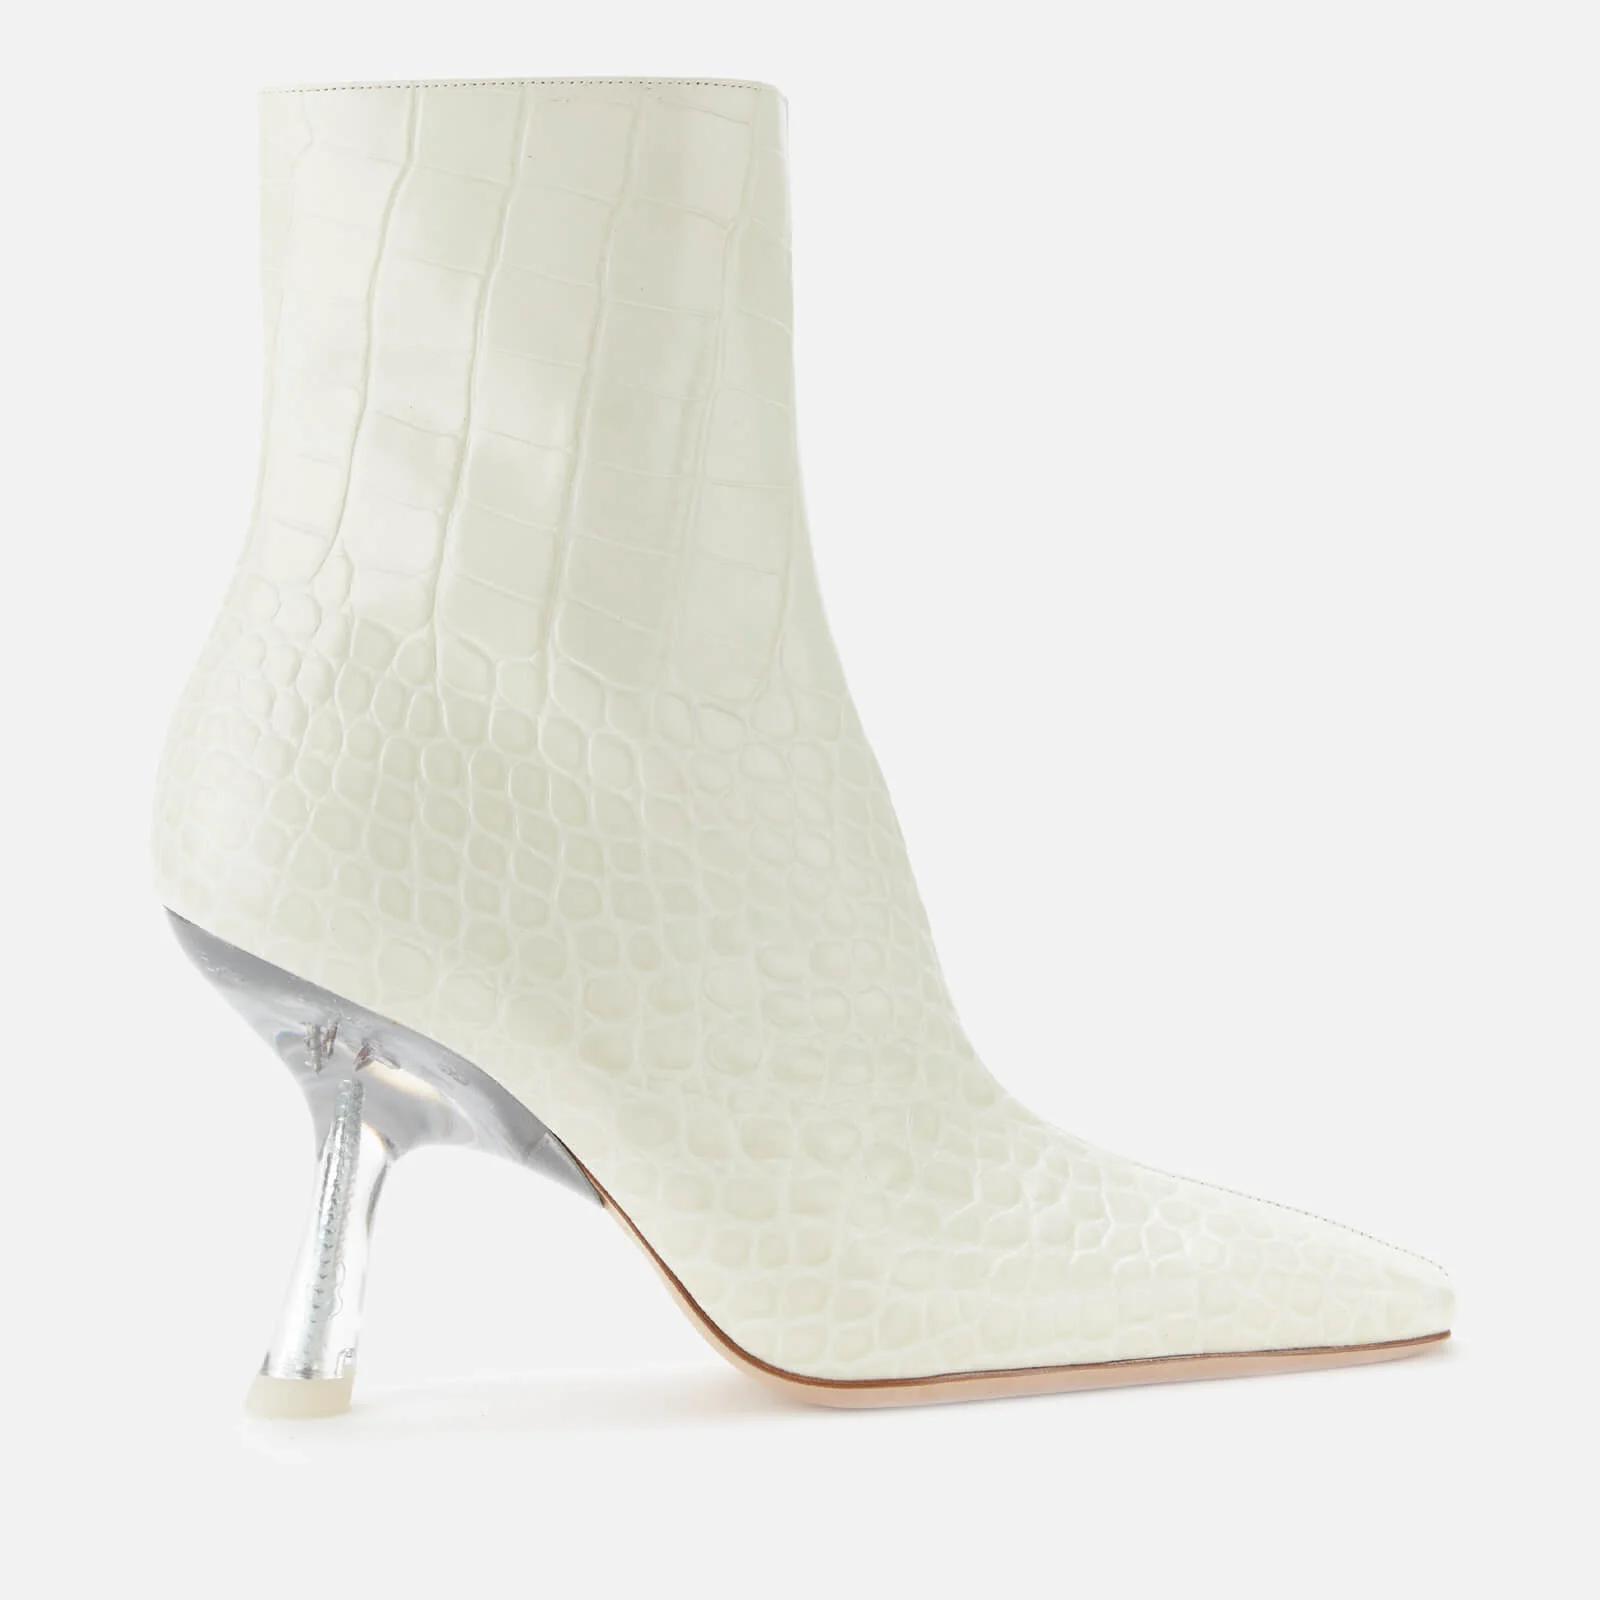 Simon Miller Women's Foxy Leather Heeled Boots - White Image 1